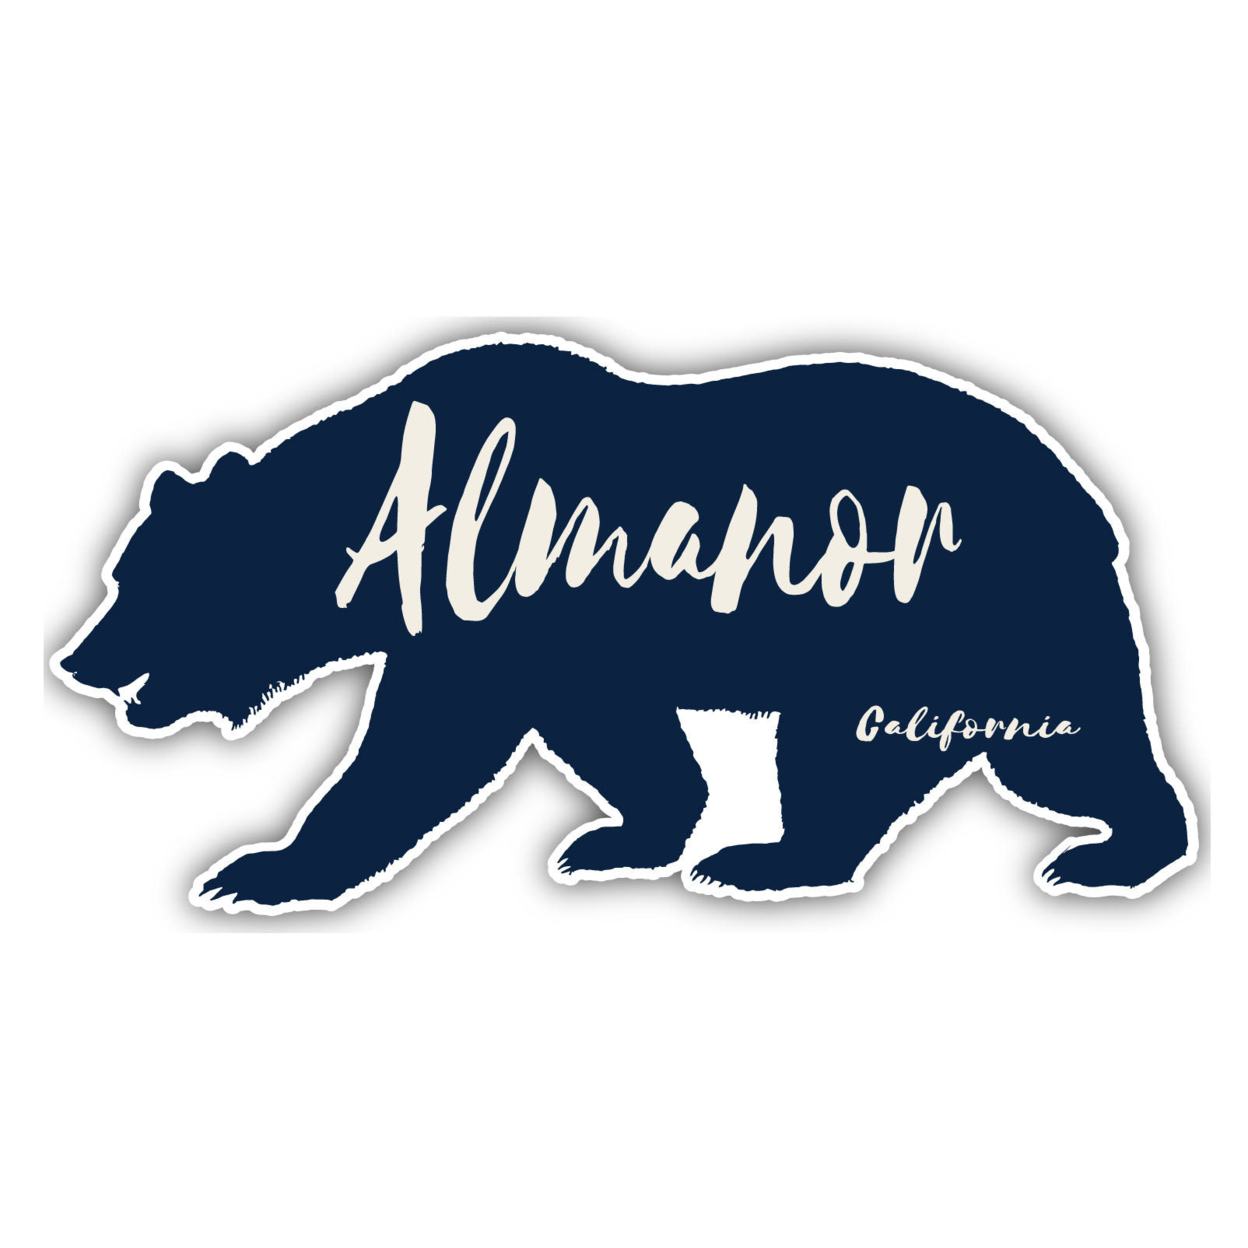 Almanor California Souvenir Decorative Stickers (Choose Theme And Size) - 4-Pack, 2-Inch, Camp Life